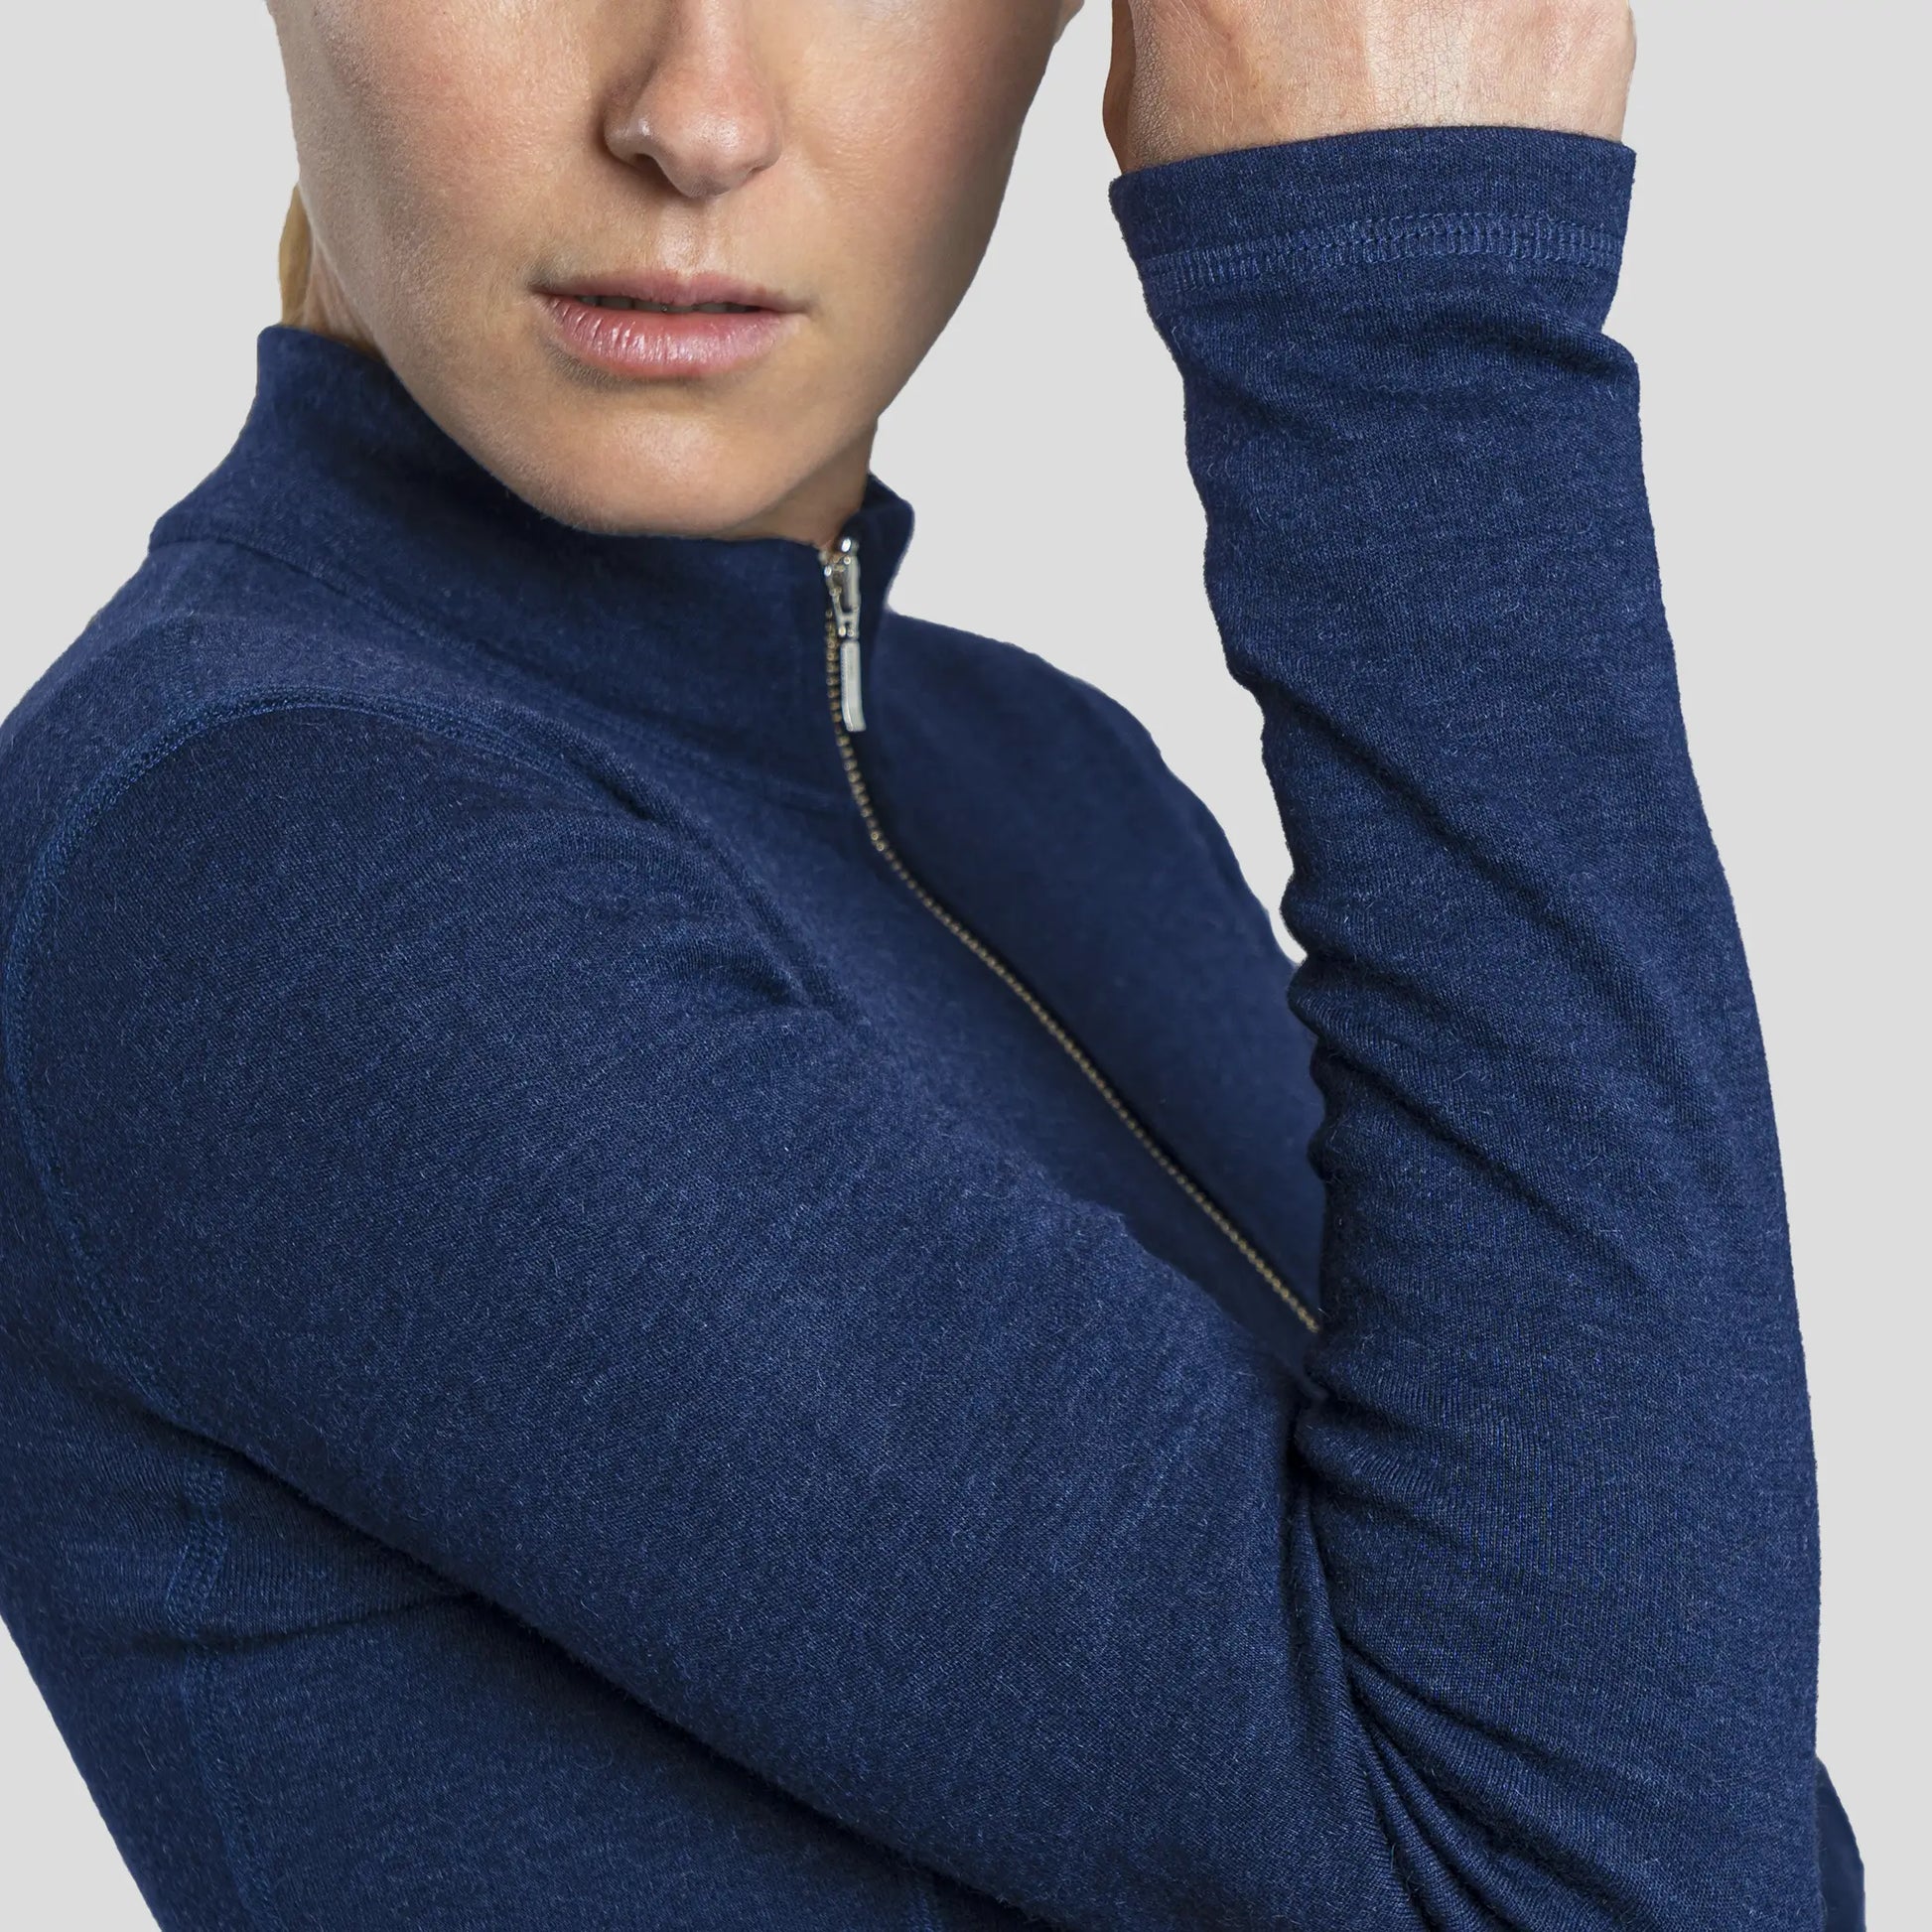 womens most comfortable jacket full zip color navy blue